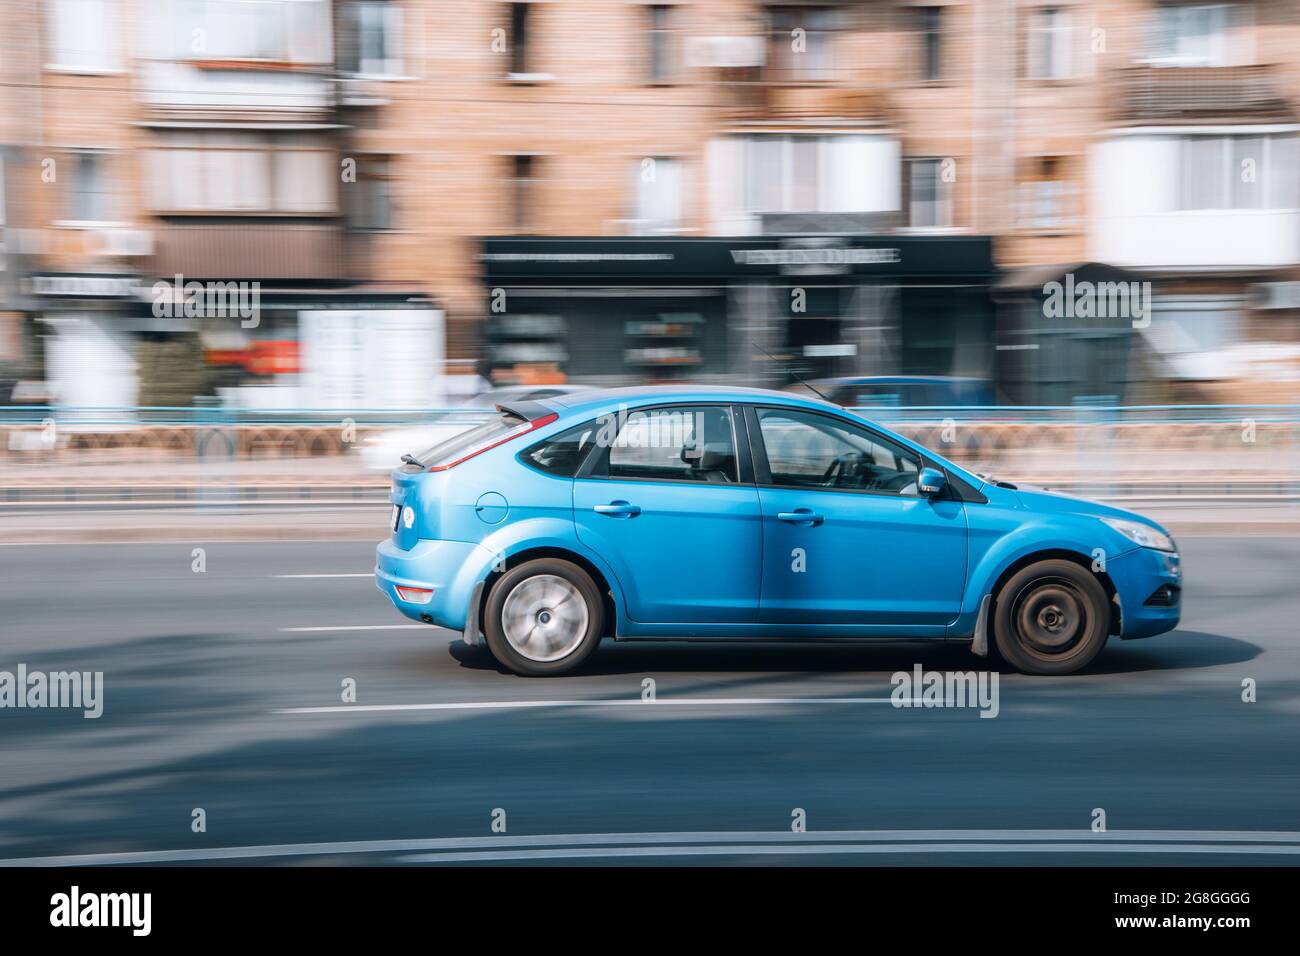 Ukraine, Kyiv - 16 July 2021: Light Blue Ford Focus car moving on the street. Editorial Stock Photo